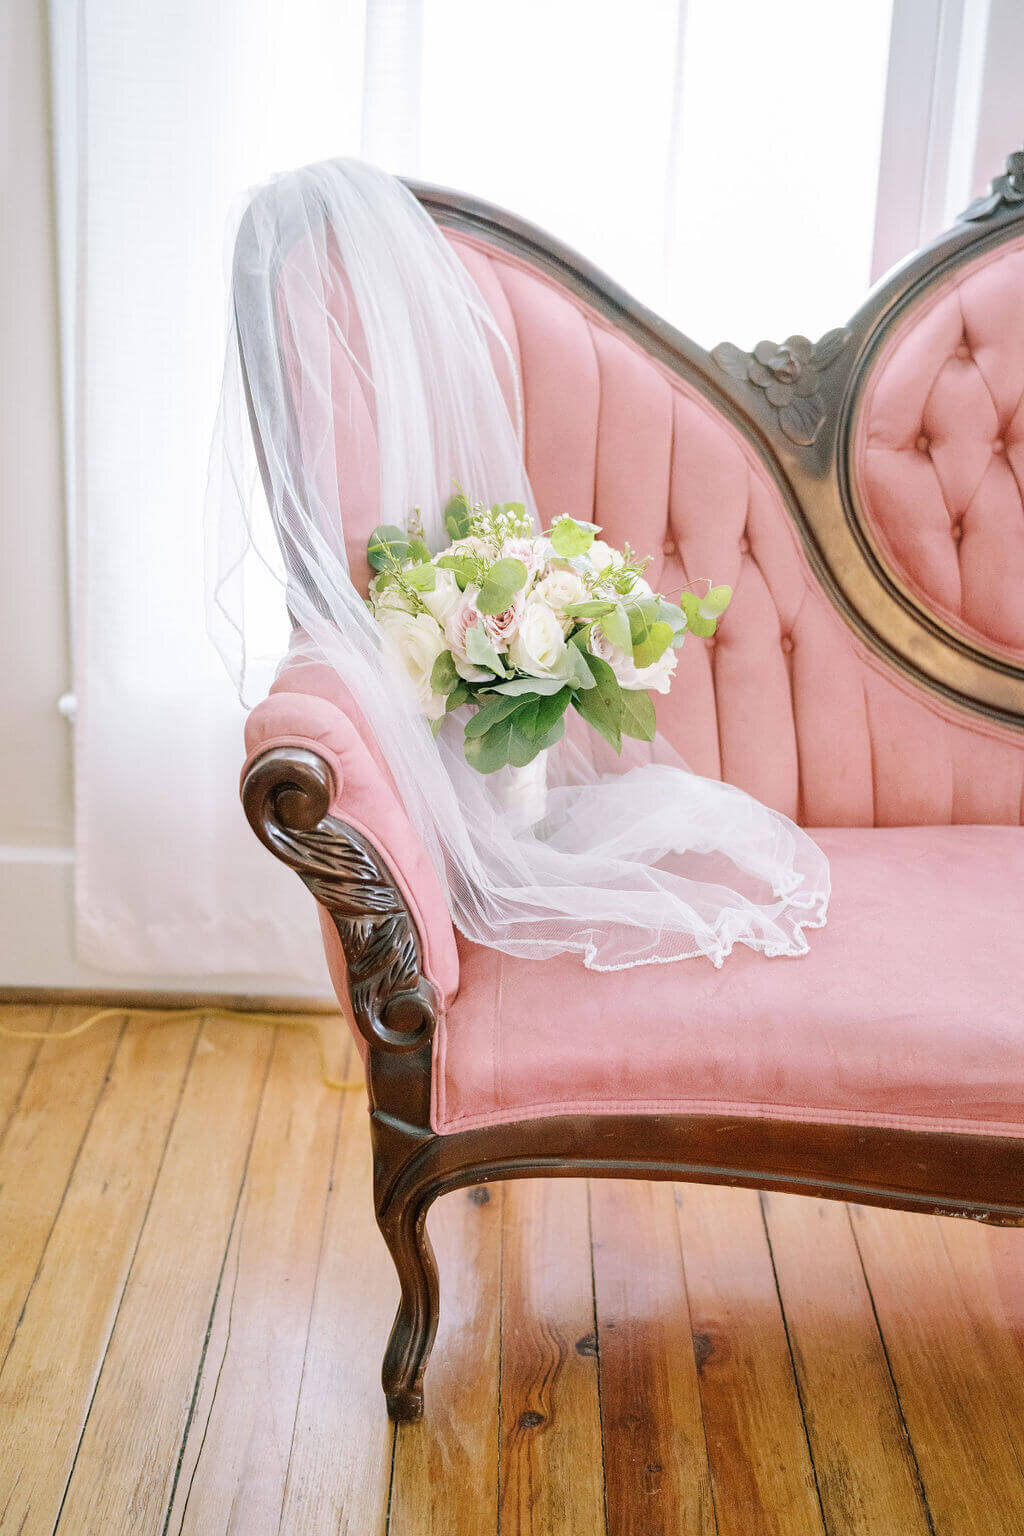 Flower bouquet sitting on pink couch with veil